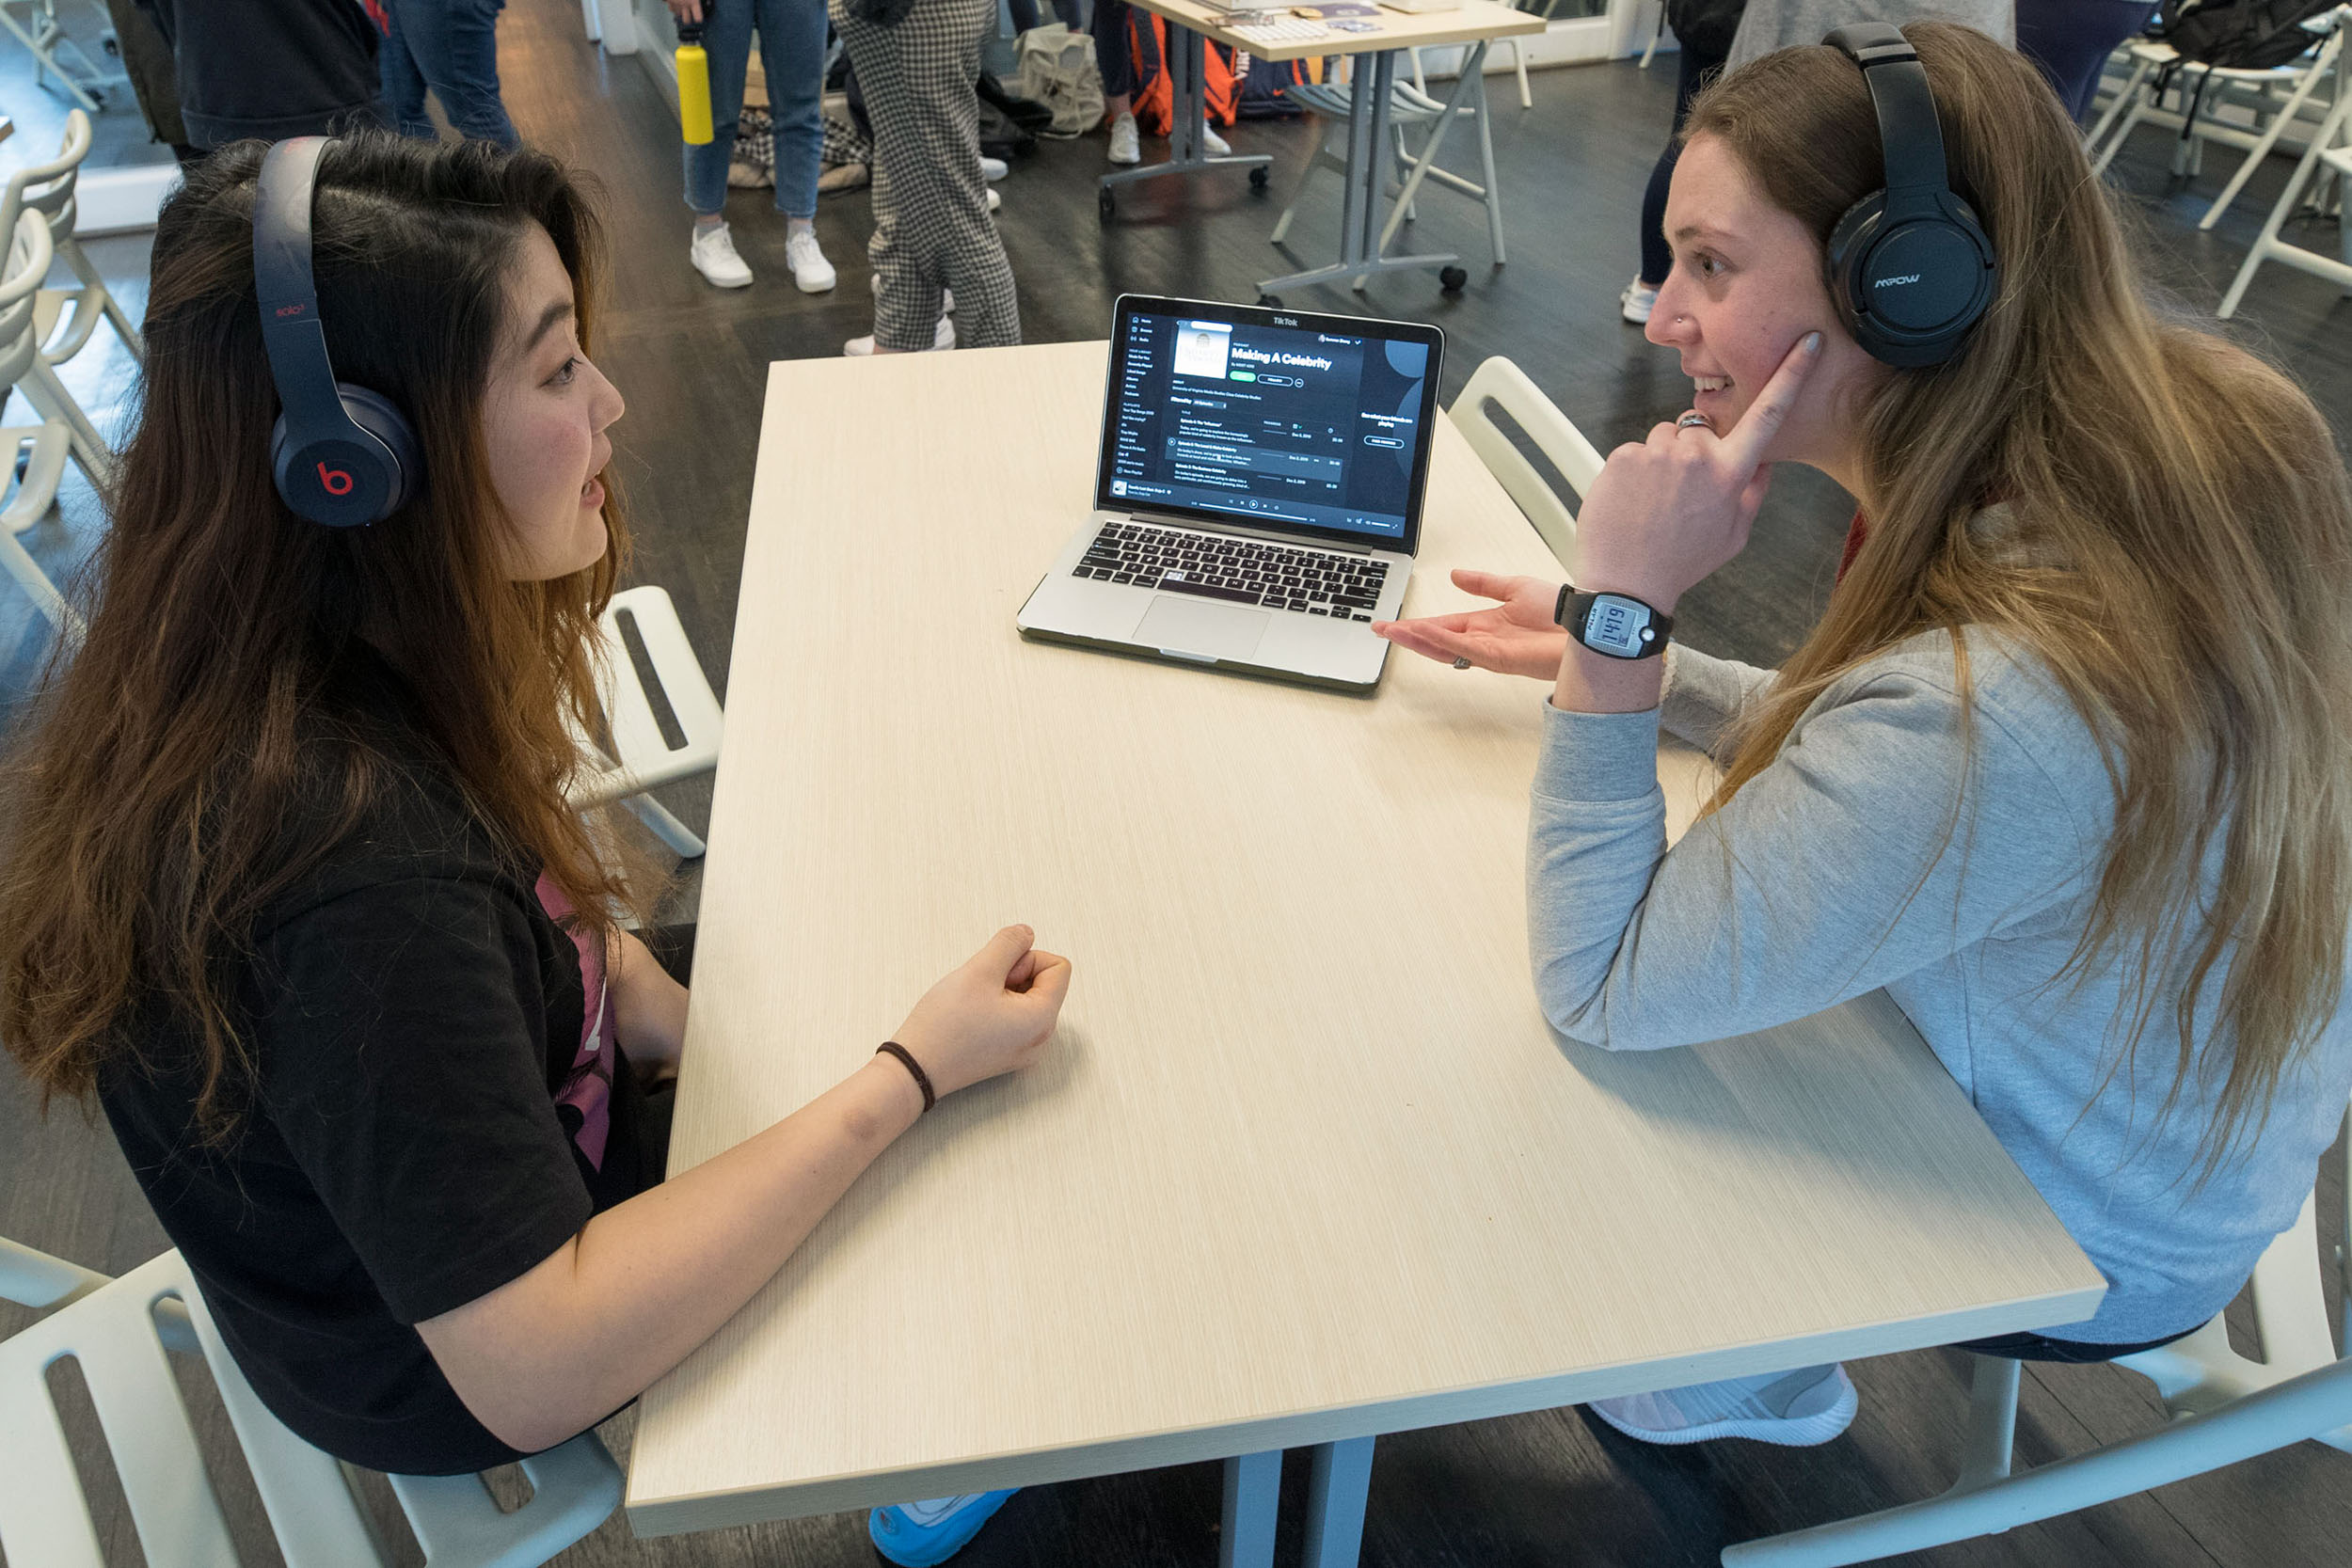 two uva students sit at the same table wearing headphones and working on one laptop